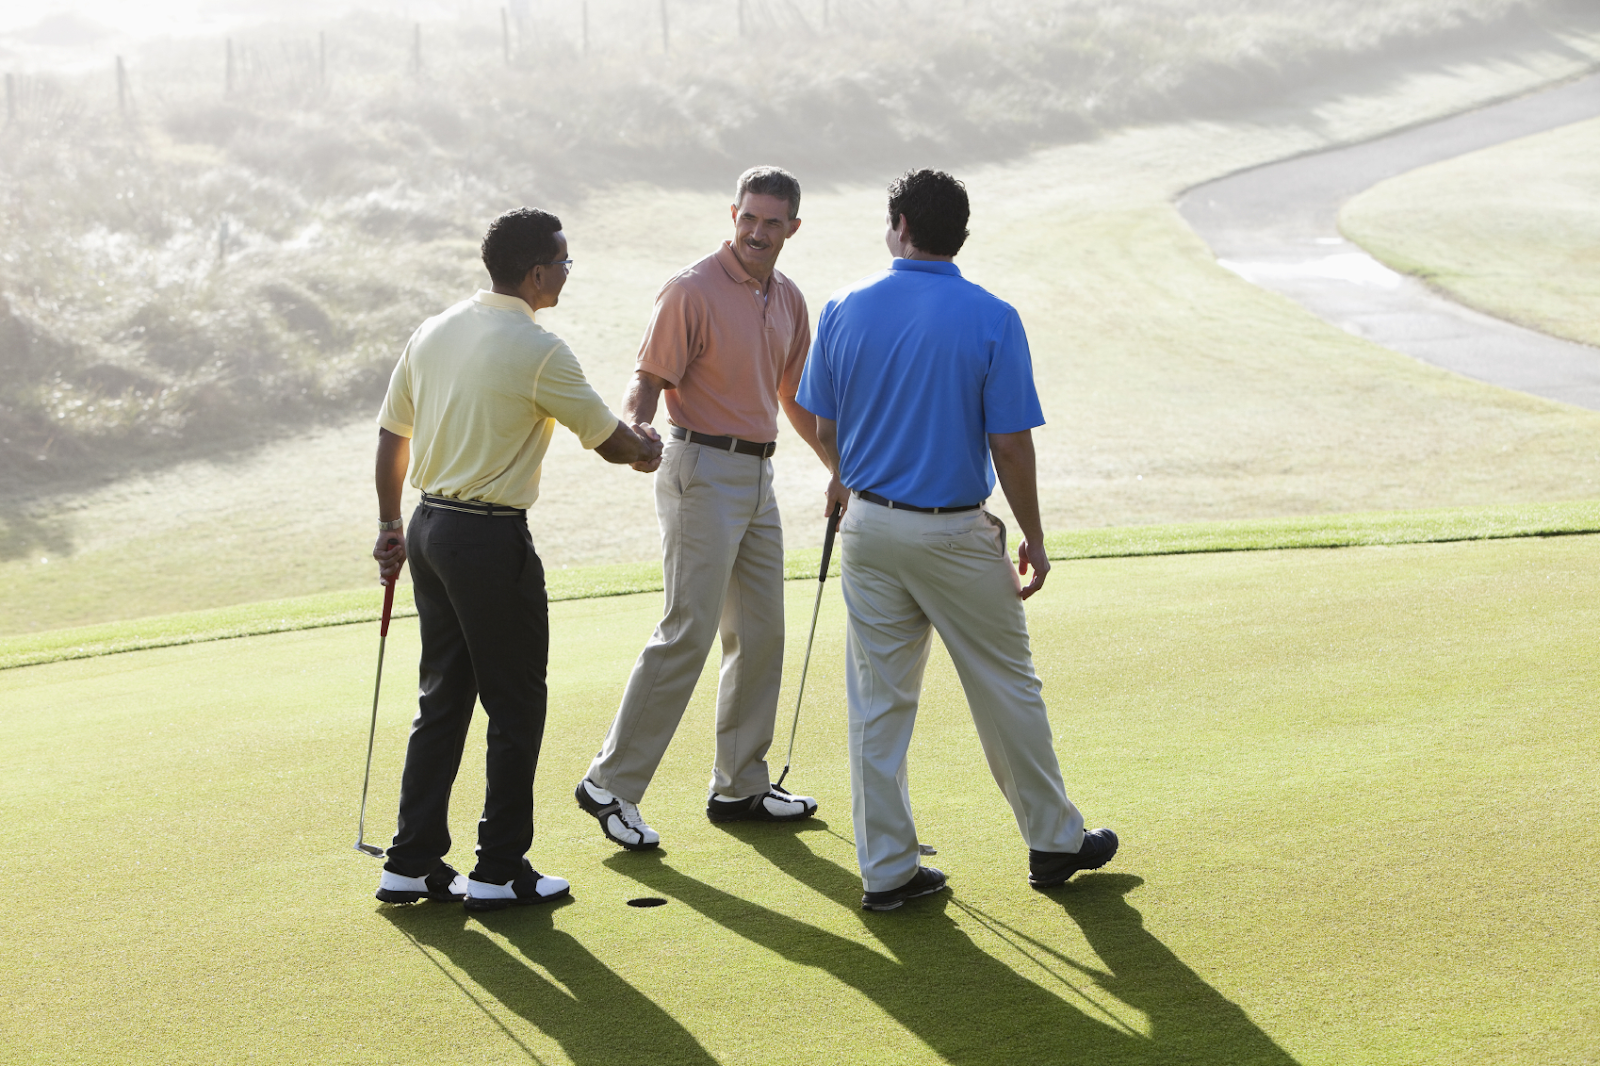 Golf and Business: How golf became a popular destination for business meetings and networking events.